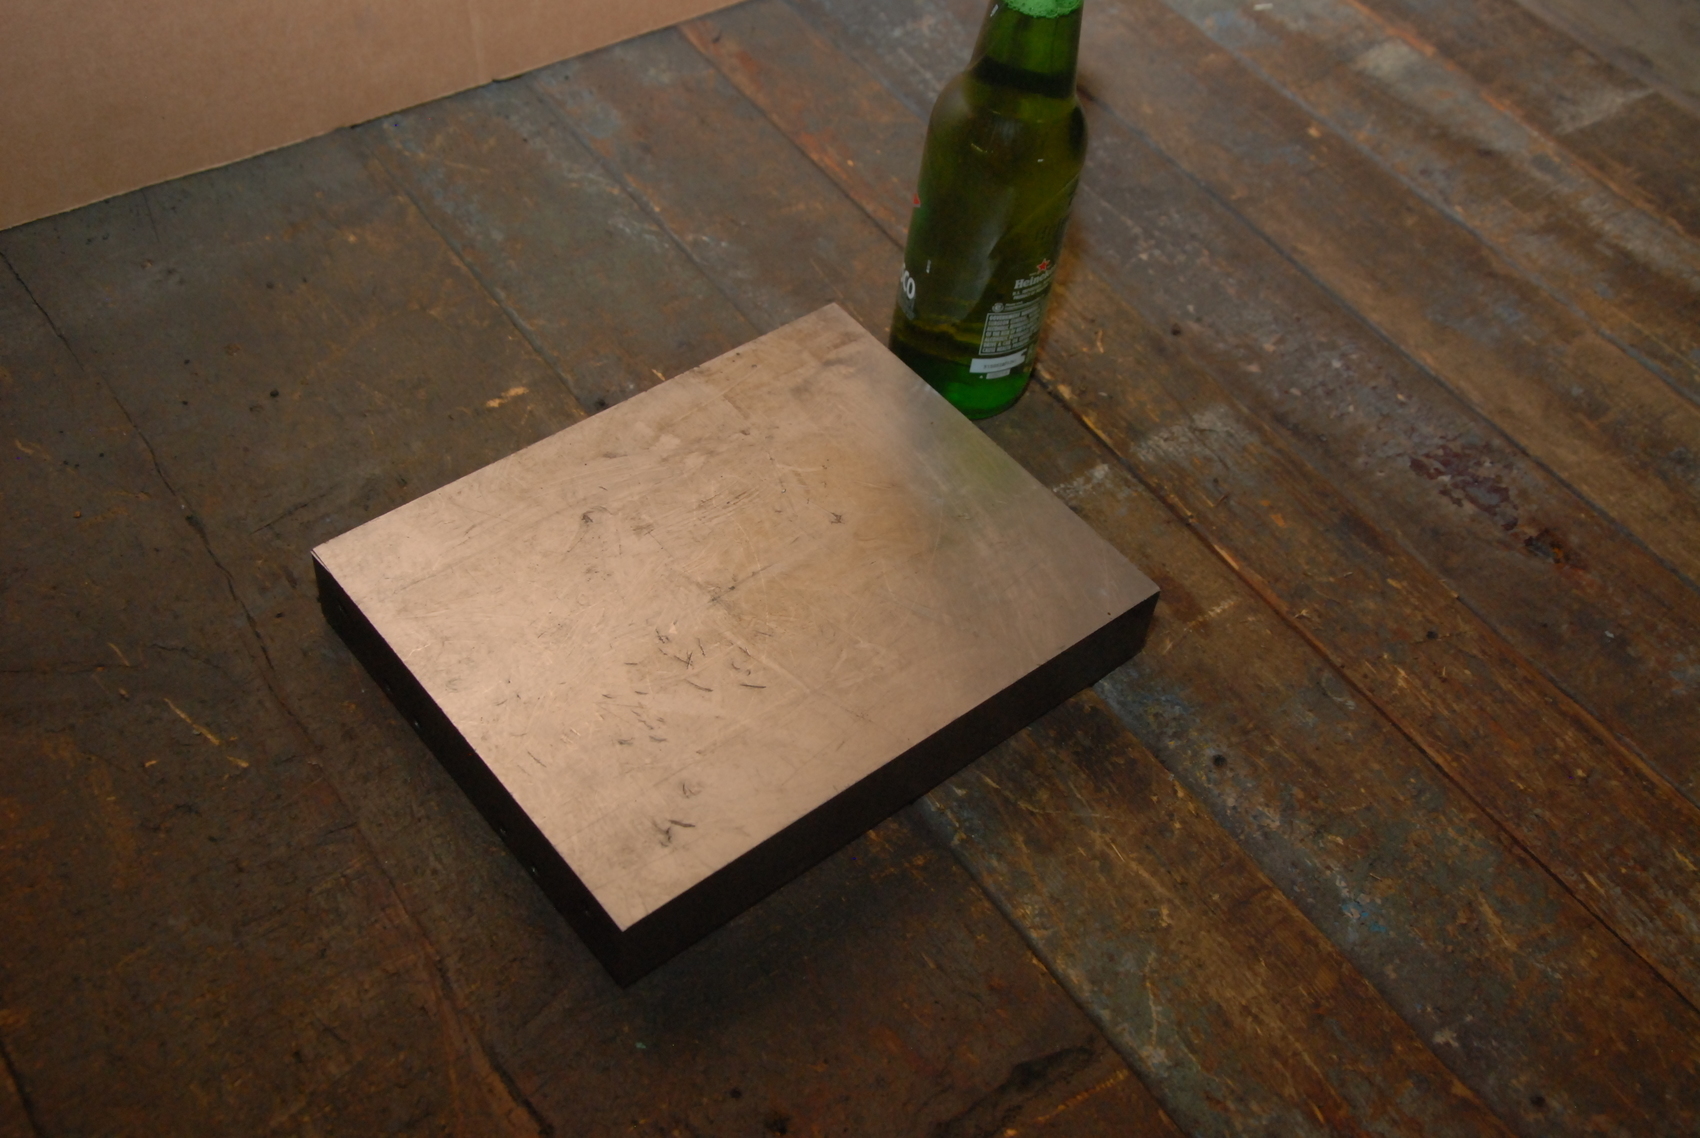 ONE steel Plate for blacksmith anvil,28 lbs;9x7-1/4x1-1/4"